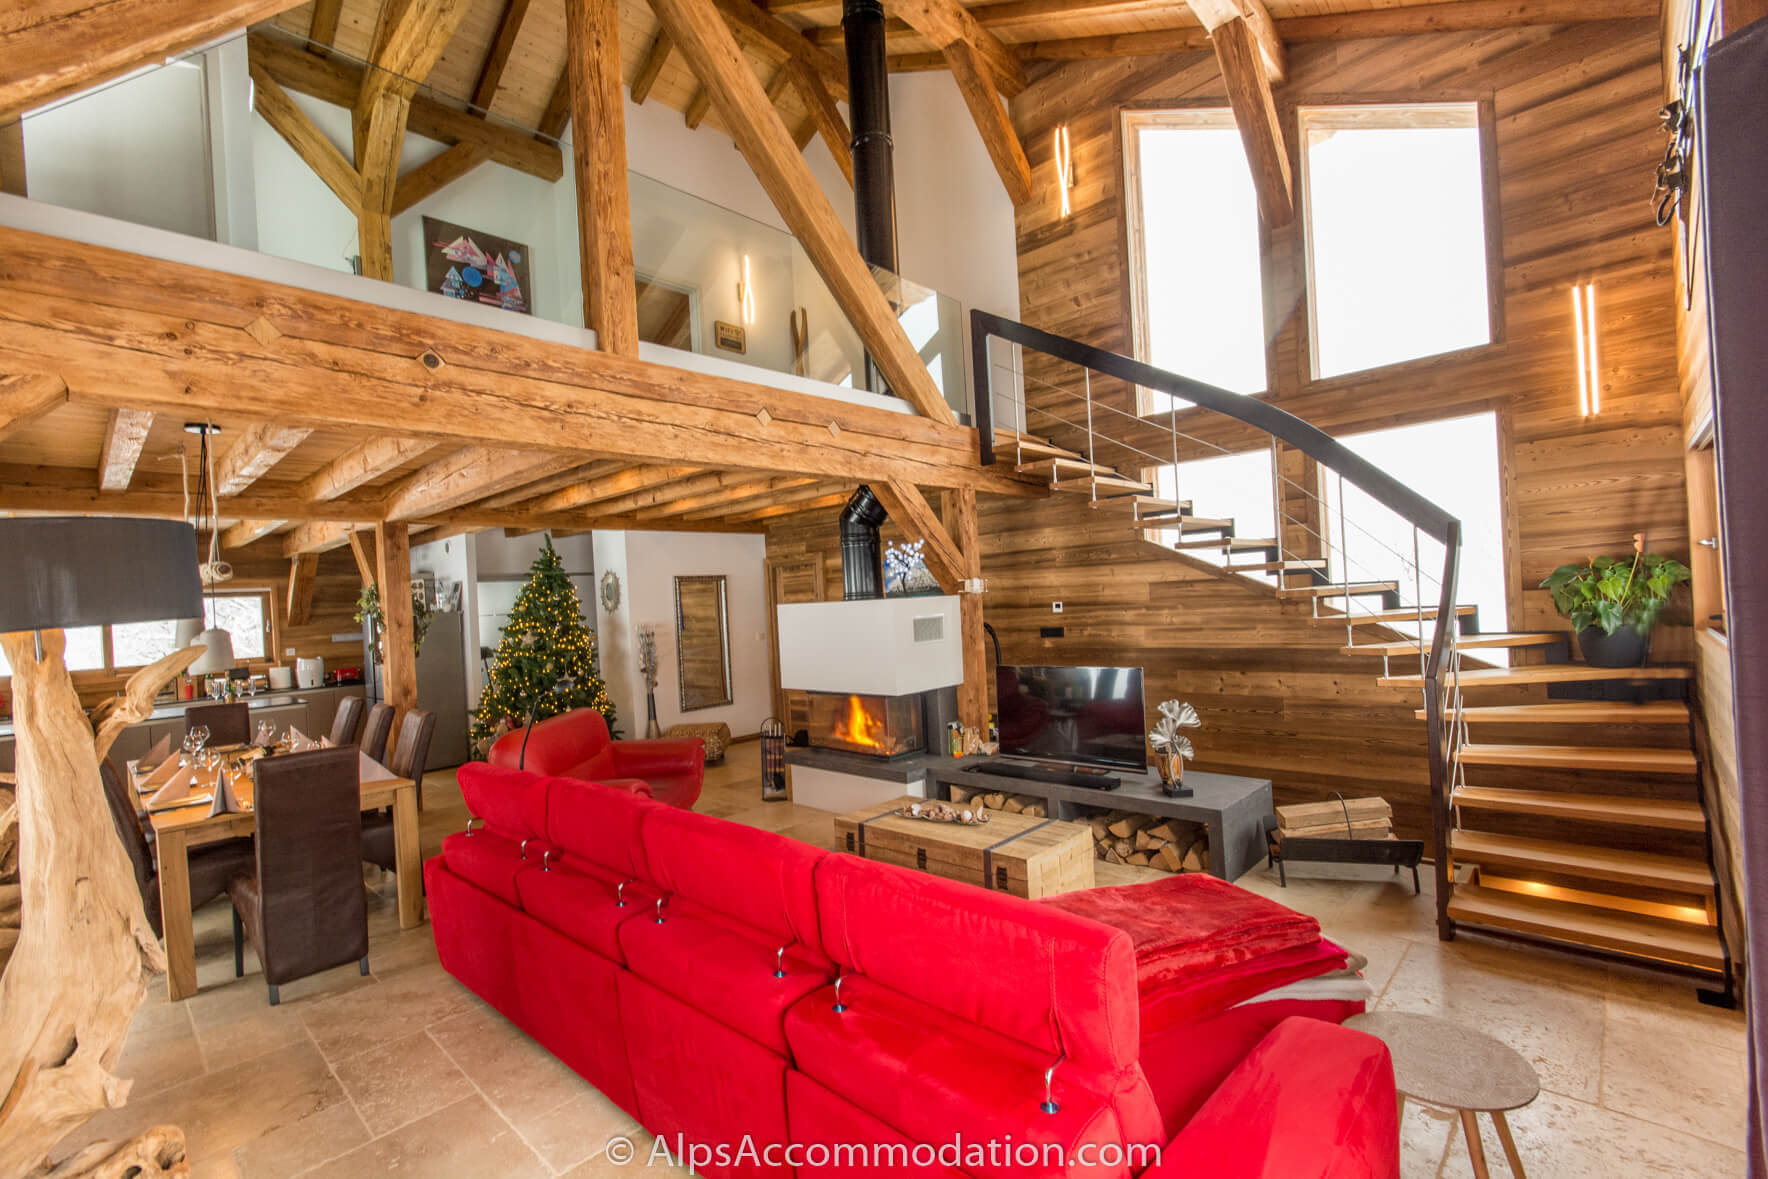 Chalet Sole Mio Morillon - The comfortable living area with reclining sofa